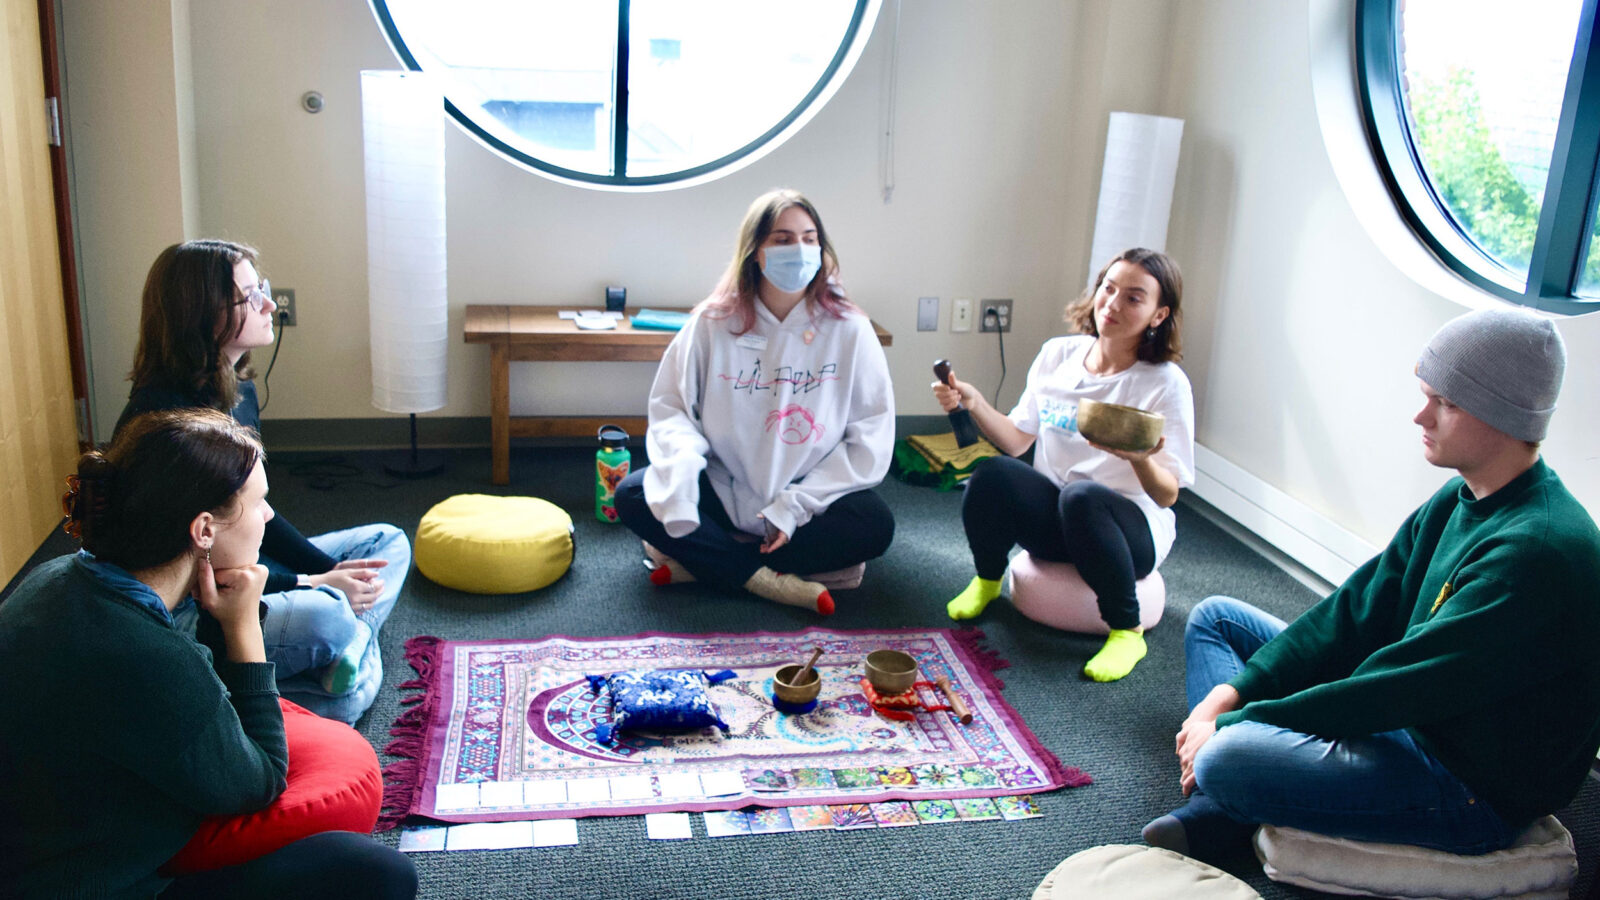 five students sit on the floor in the interfaith room getting ready to meditate. there are colorful pillows and blankets spread on the floor.